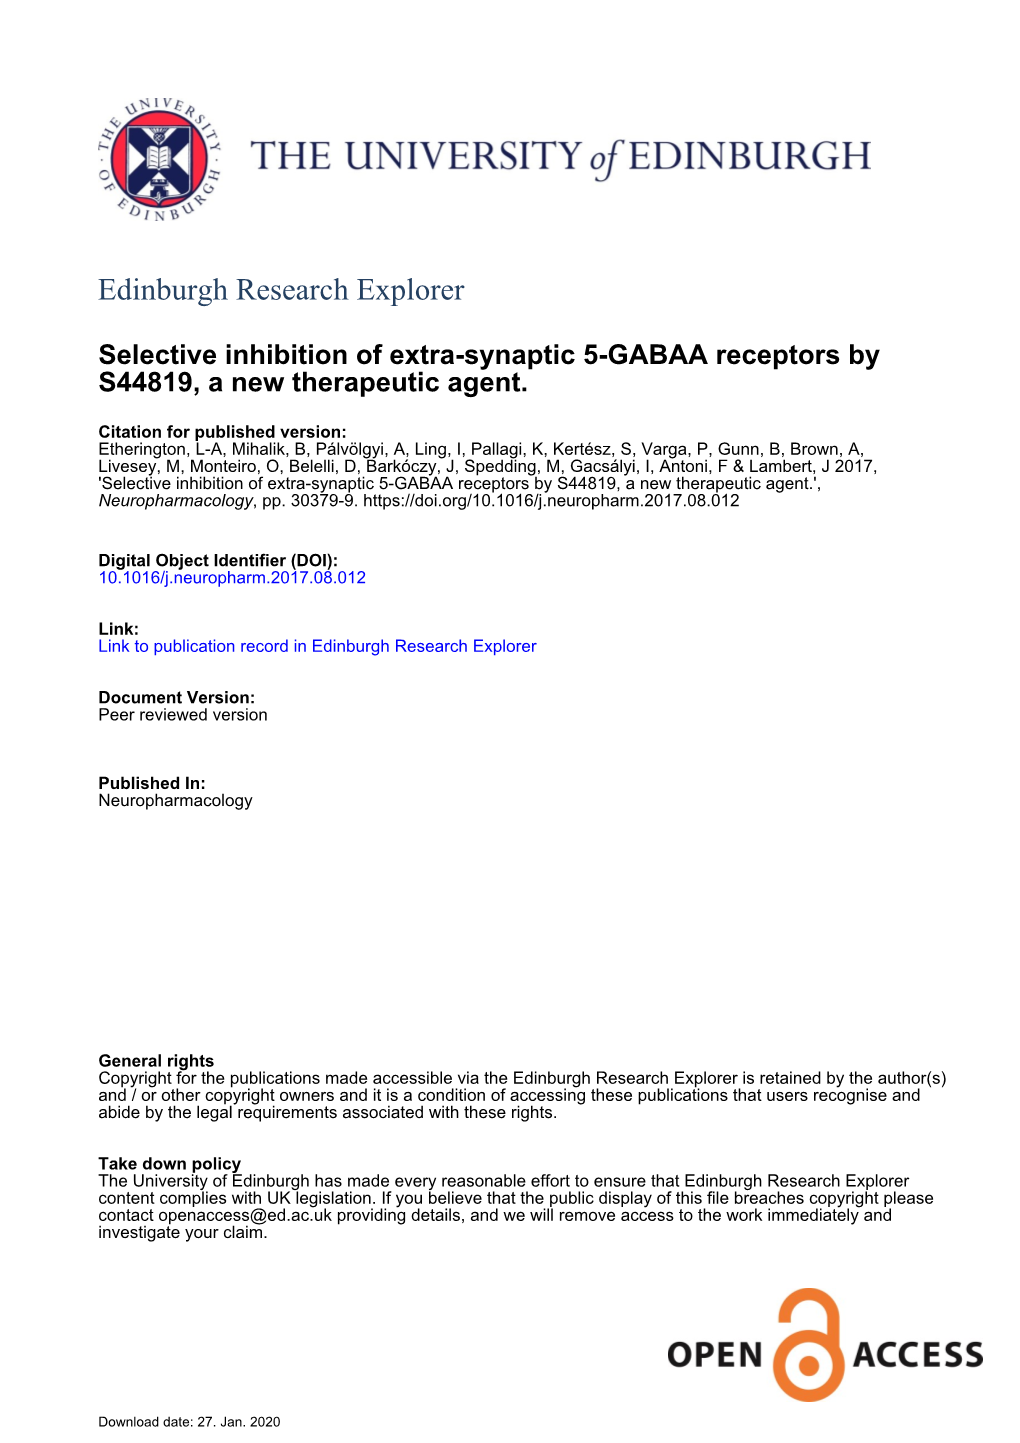 Selective Inhibition of Extra-Synaptic Α5-GABAA Receptors by S44819, a New Therapeutic Agent